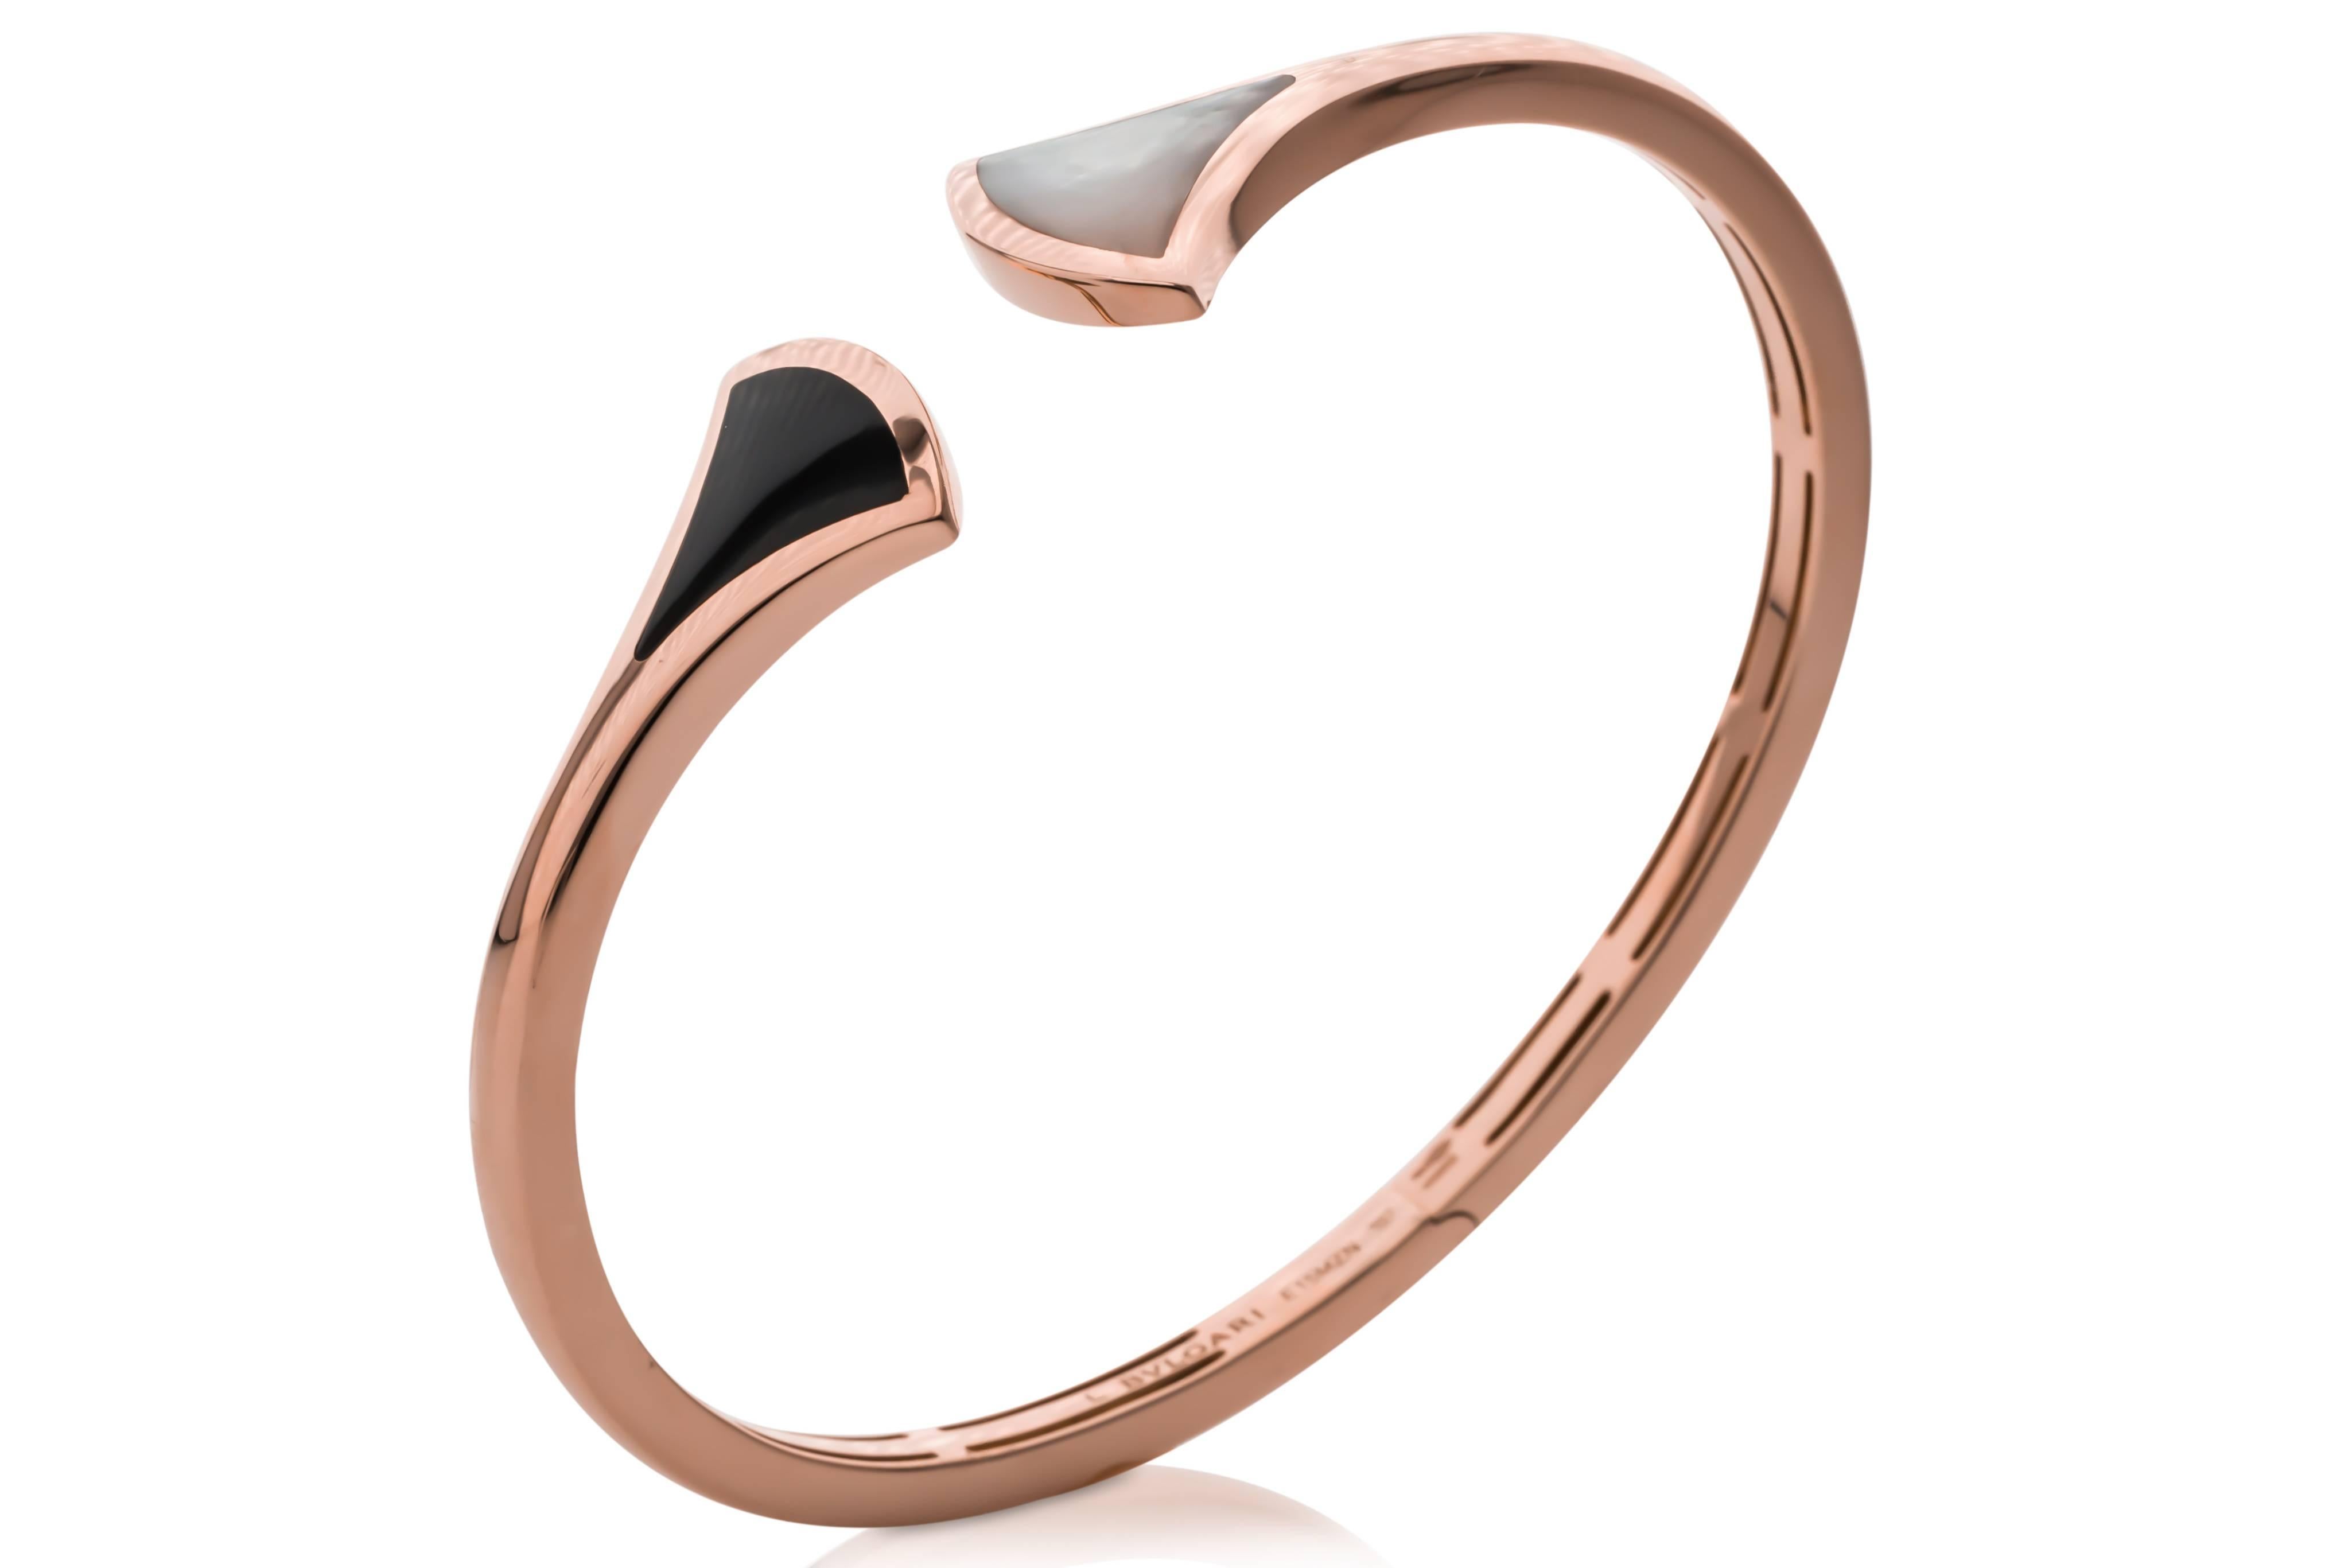 Estate 18K rose gold Diva bracelet, by Bulgari.  Set with onyx and mother of pearl.  Size Large.